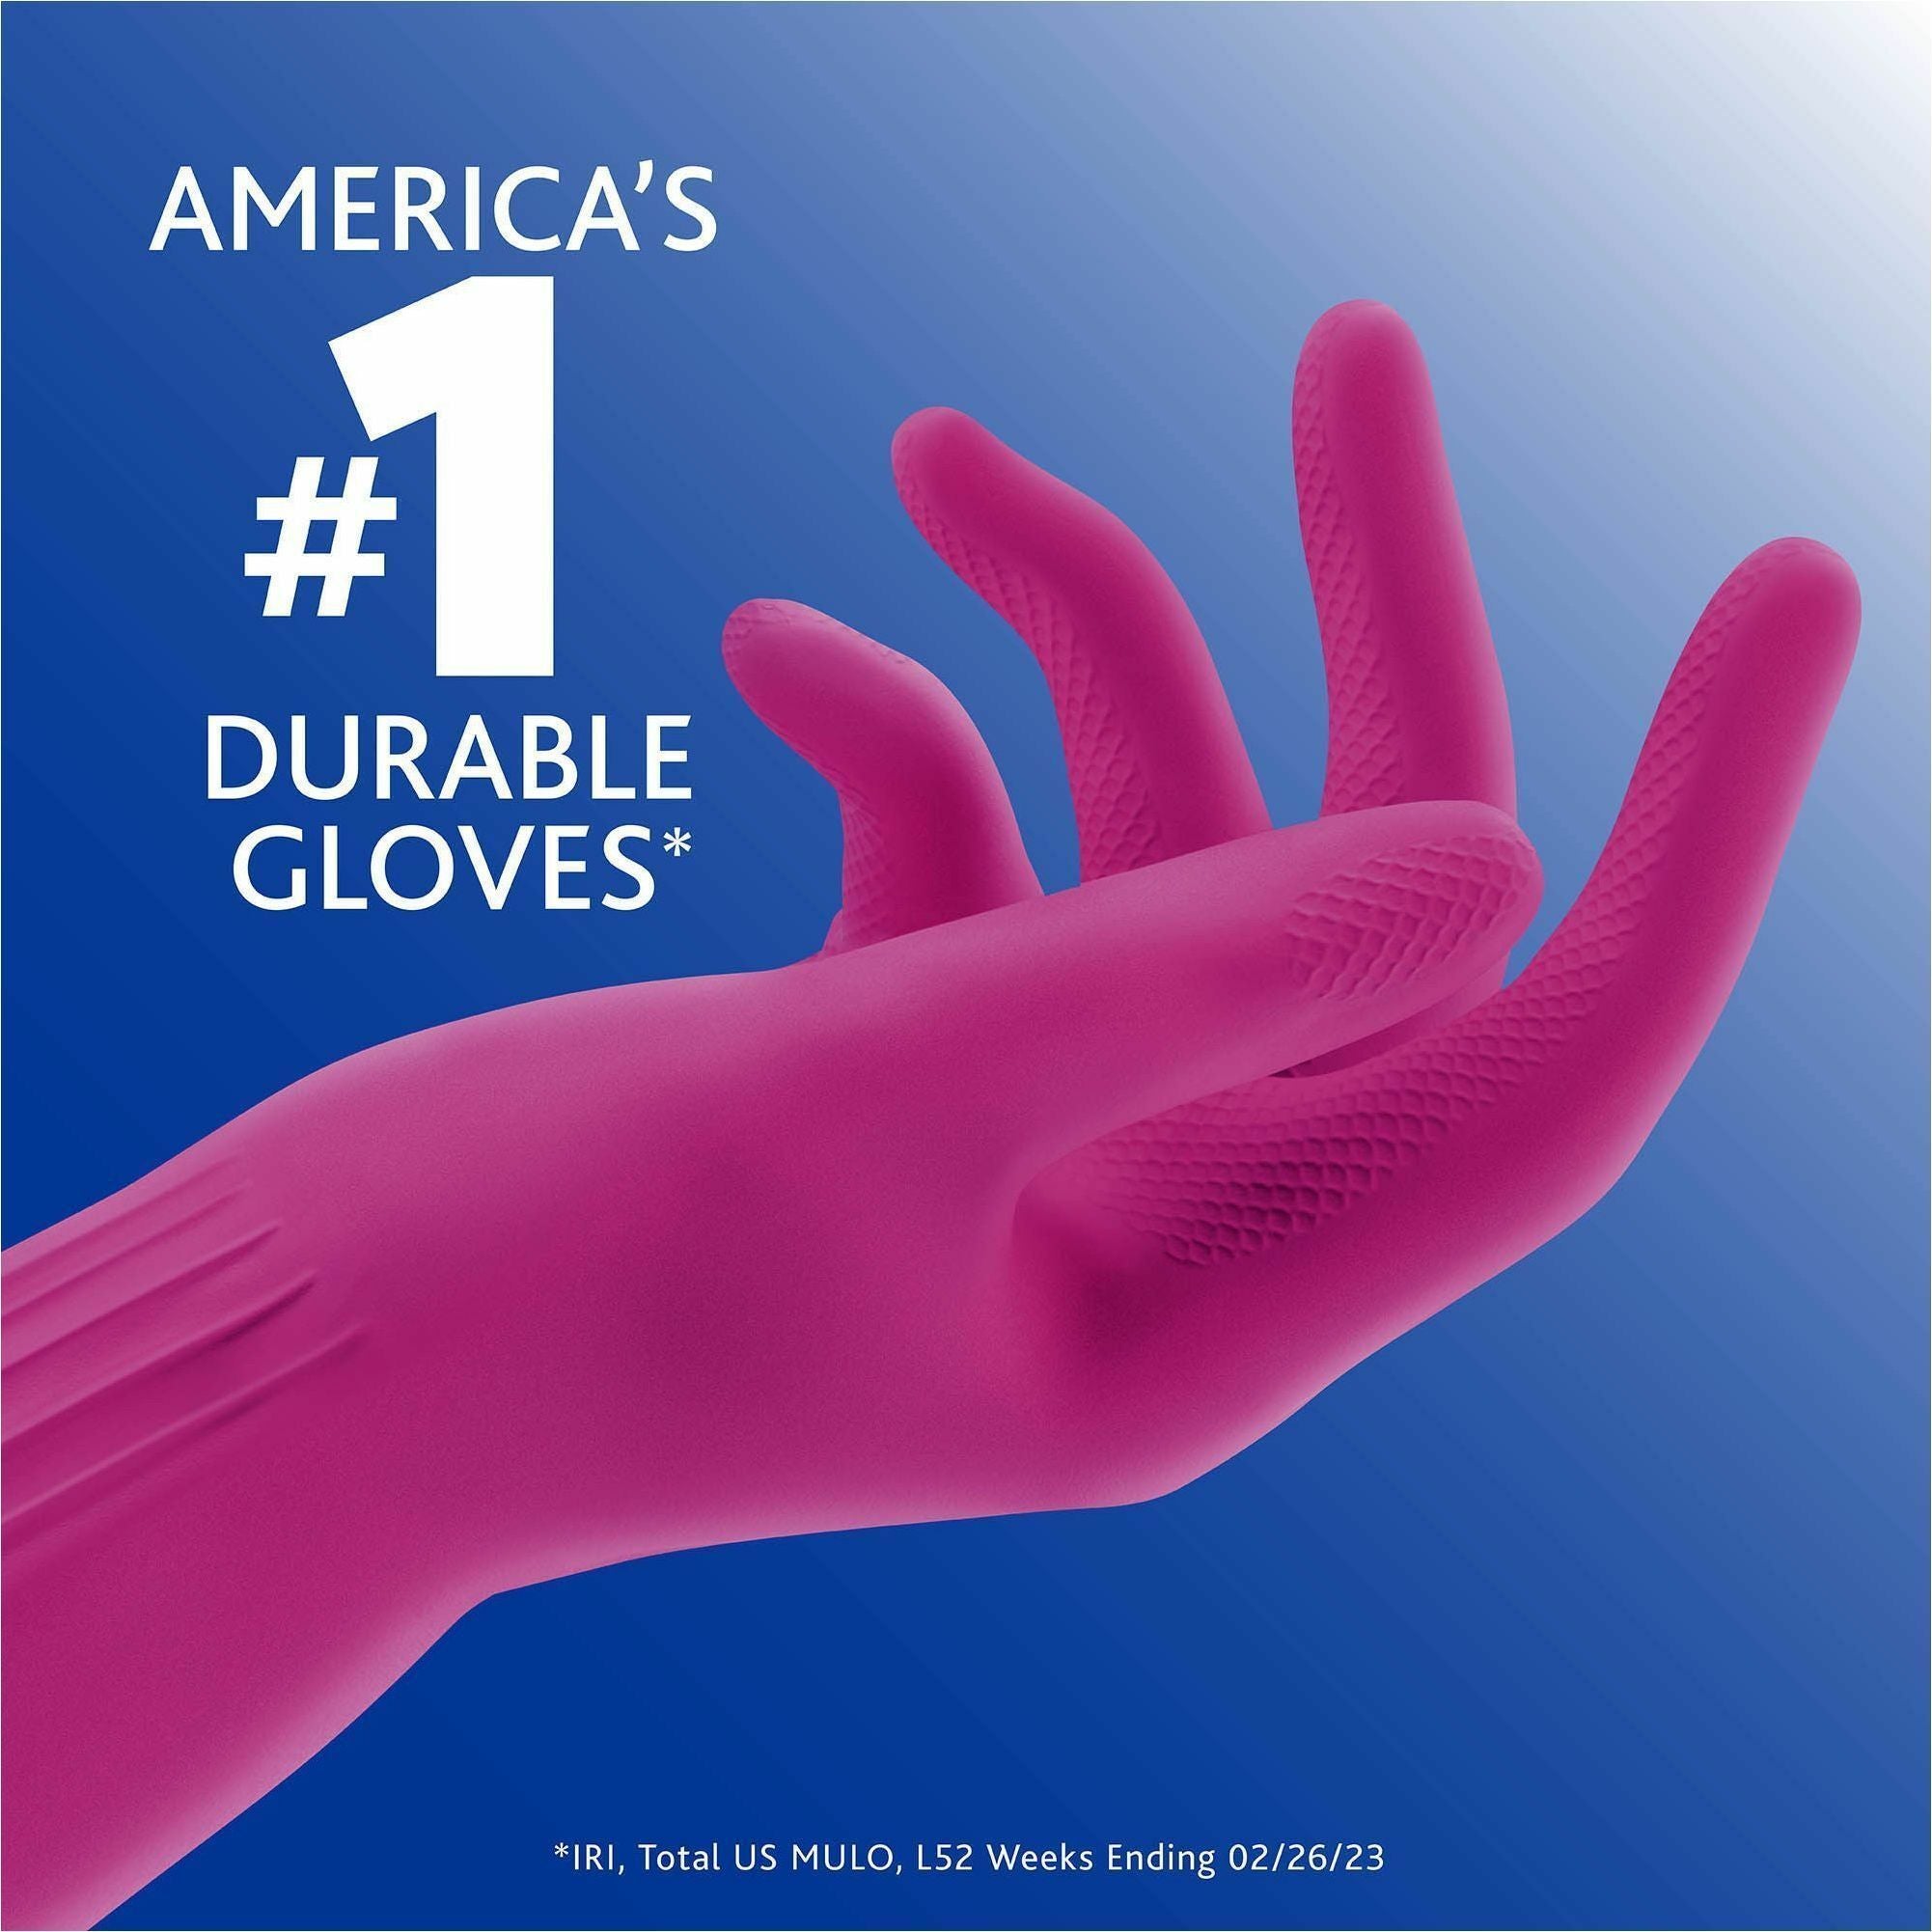 o-cedar-playtex-living-gloves-chemical-bacteria-protection-large-size-latex-neoprene-nitrile-pink-anti-microbial-reusable-durable-comfortable-odor-resistant-textured-palm-textured-fingertip-for-household-cleaning-2-pair-14_fhp166120 - 5